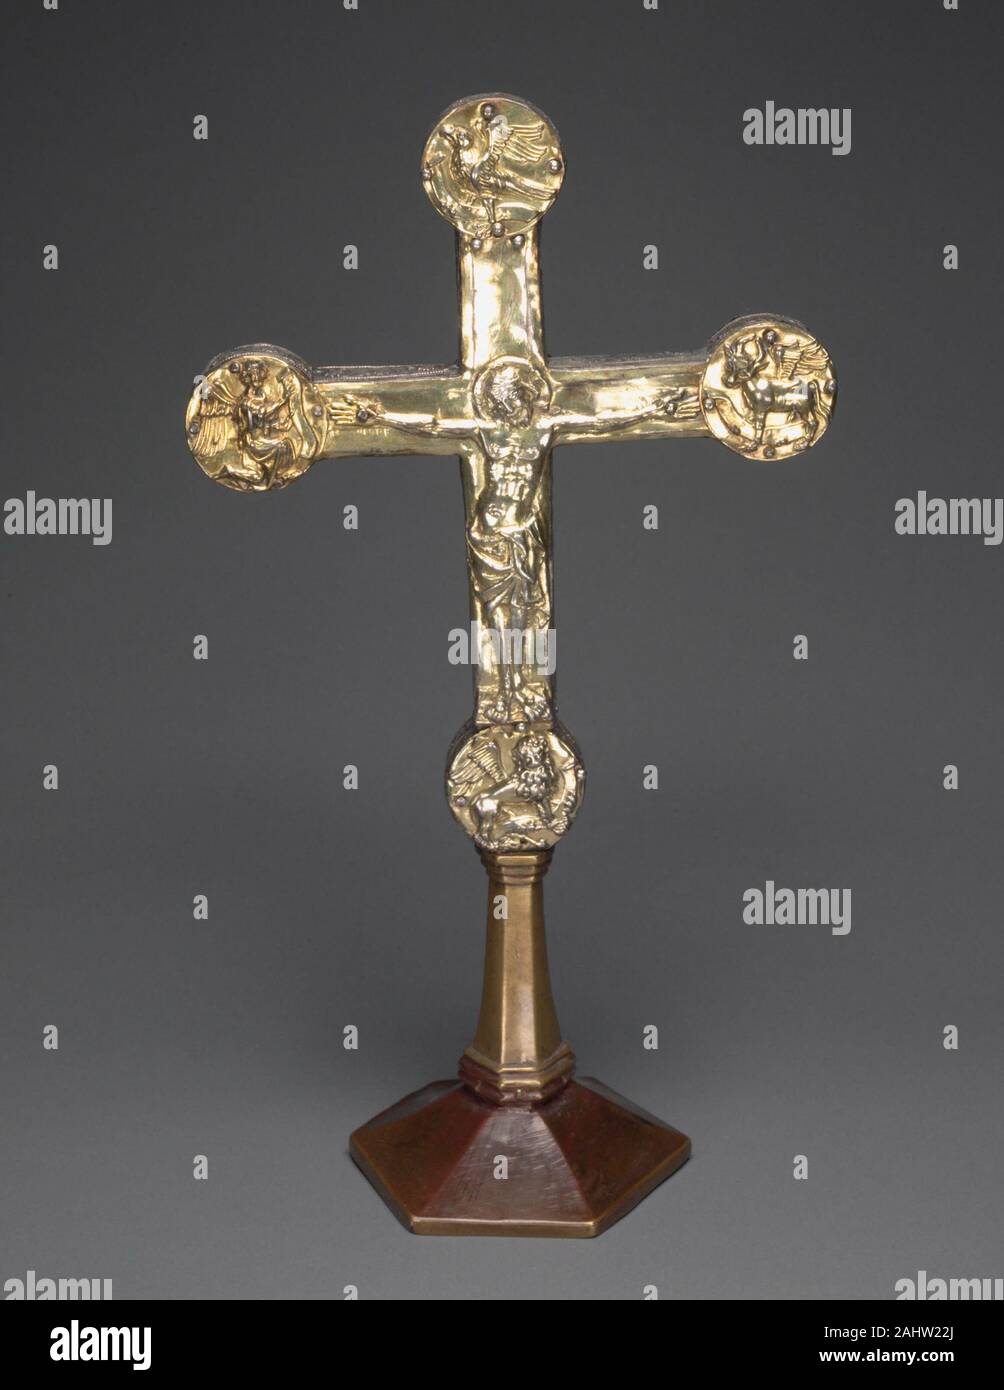 Altar Cross. 1320–1330. Brunswick. Silver gilt over a wooden core; foot copper gilt This silver-gilt cross with the figure of the crucified Christ was meant to be placed on an altar. Each arm of the cross terminates with a roundel containing the symbols of the four Evangelists the angel for Saint Matthew, the lion for Saint Mark, the ox for Saint Luke, and the eagle for Saint John the Evangelist. These four images were cast from the same molds used for the Evangelist symbols that decorate a silver book cover made for a liturgical manuscript written in 1326, now housed in the Kunstgewerbemuseum Stock Photo